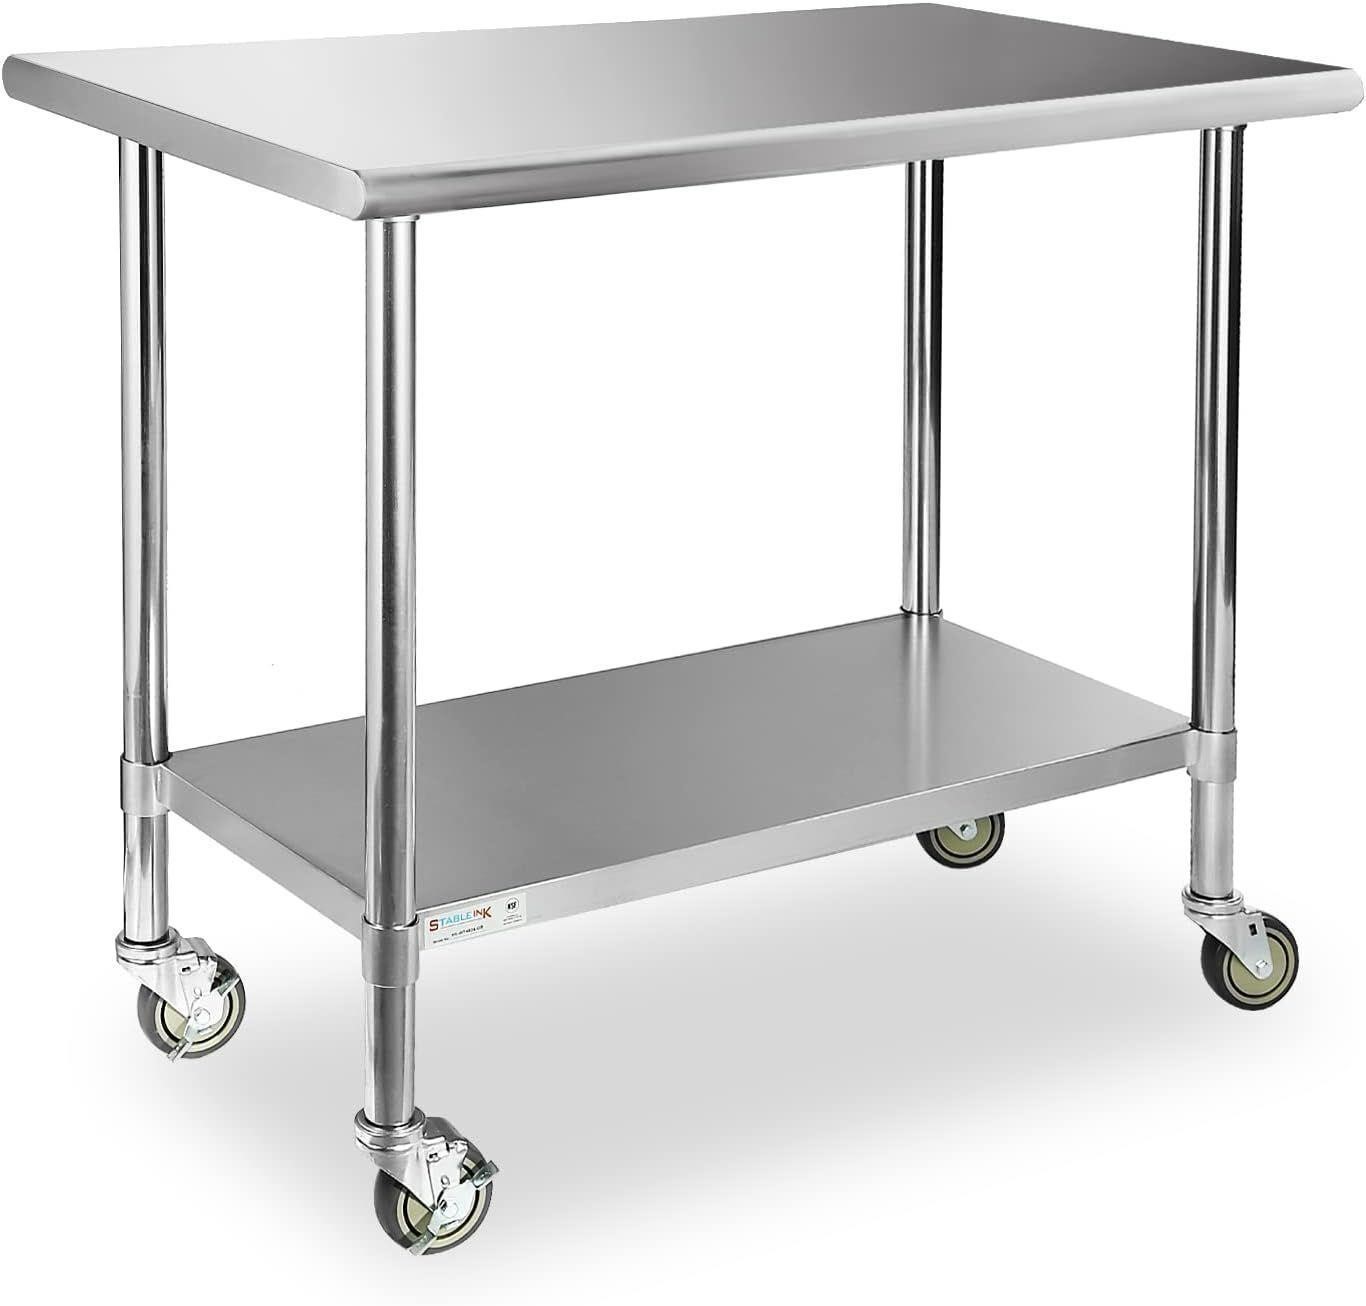 STABLEINK Stainless Steel Table with Caster Wheels